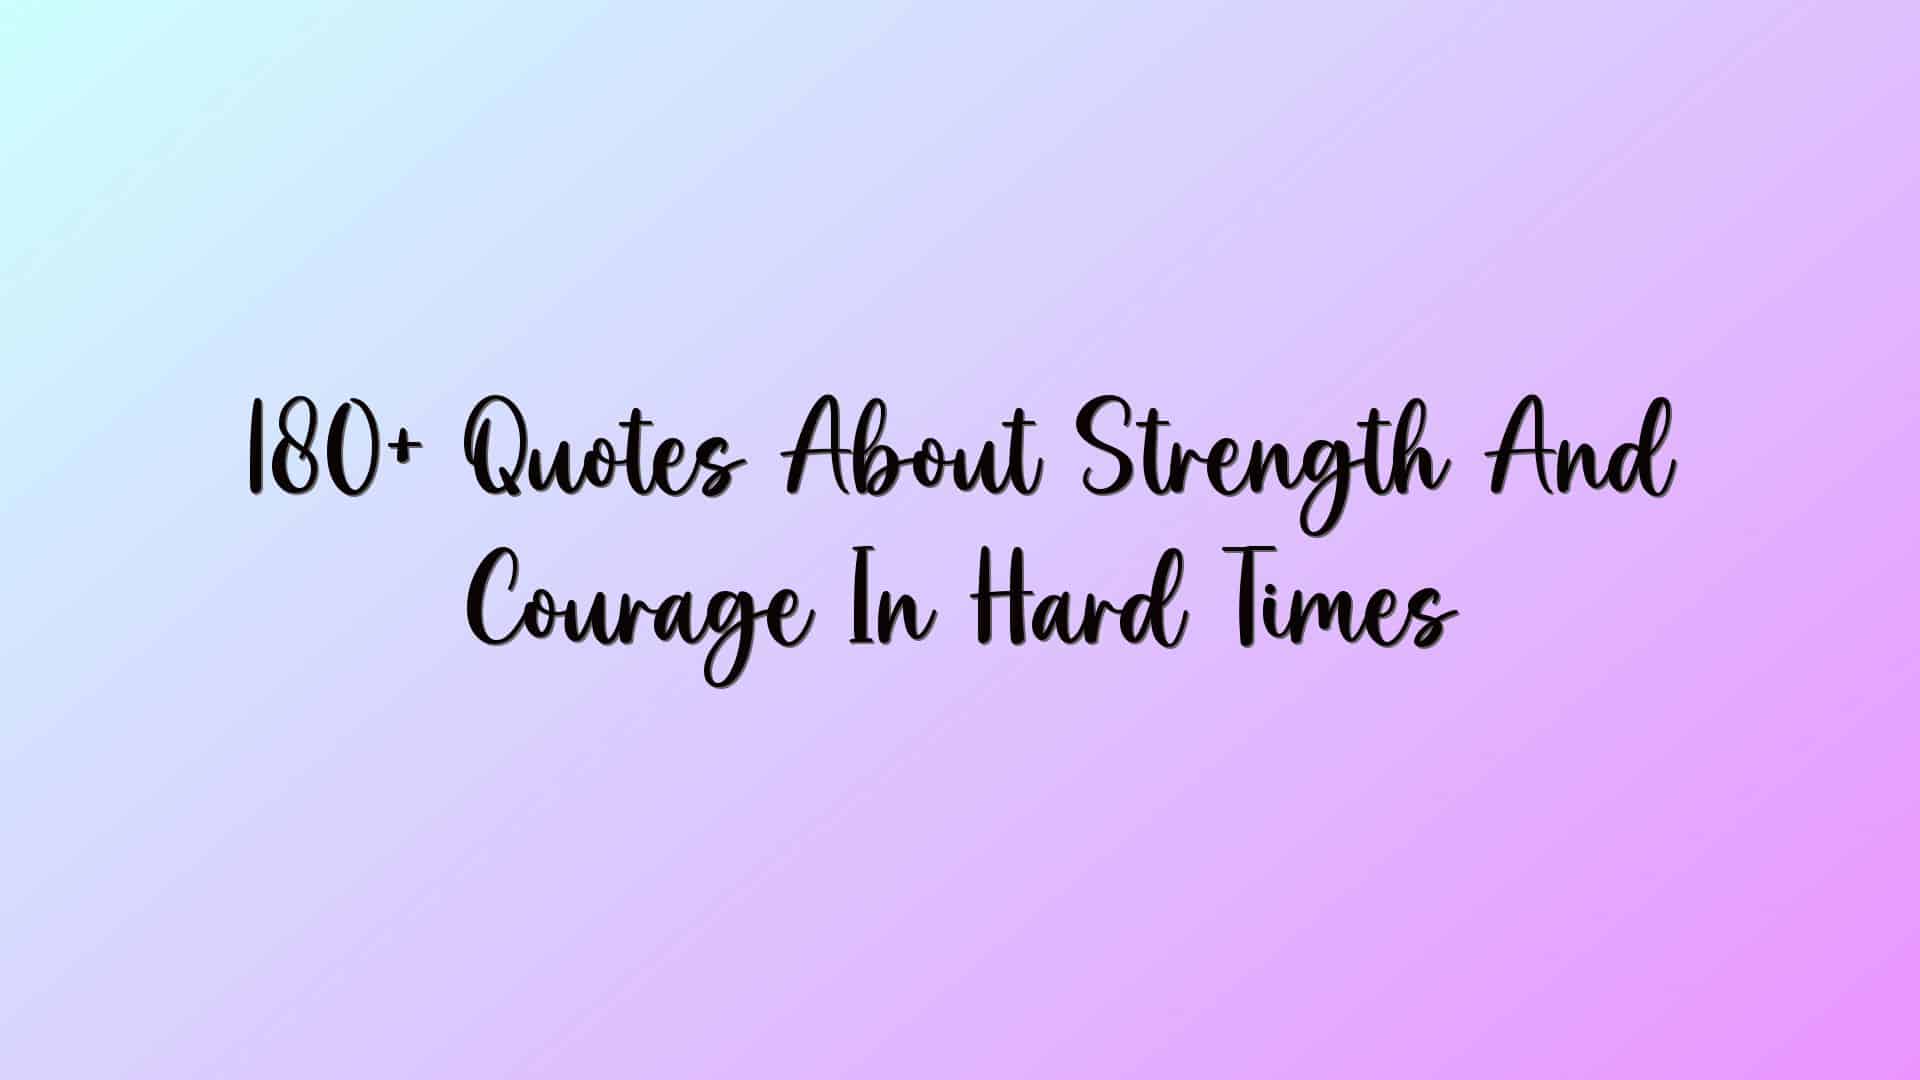 180+ Quotes About Strength And Courage In Hard Times